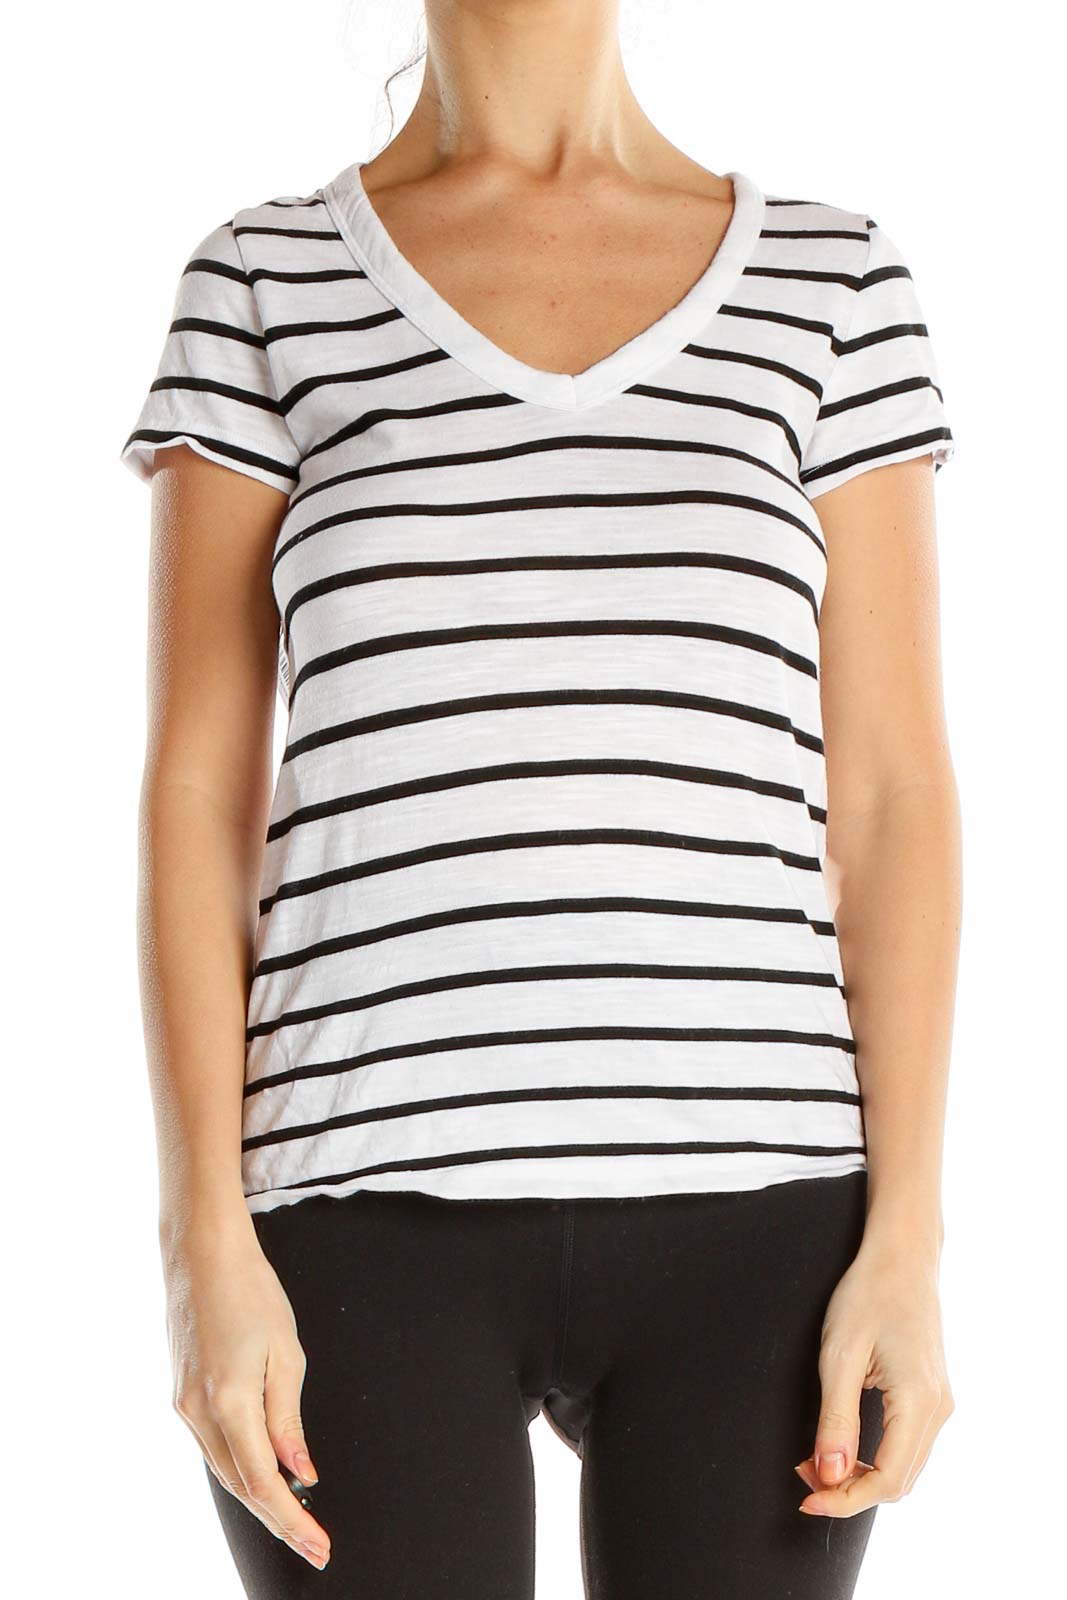 White Black Striped Casual Top Front